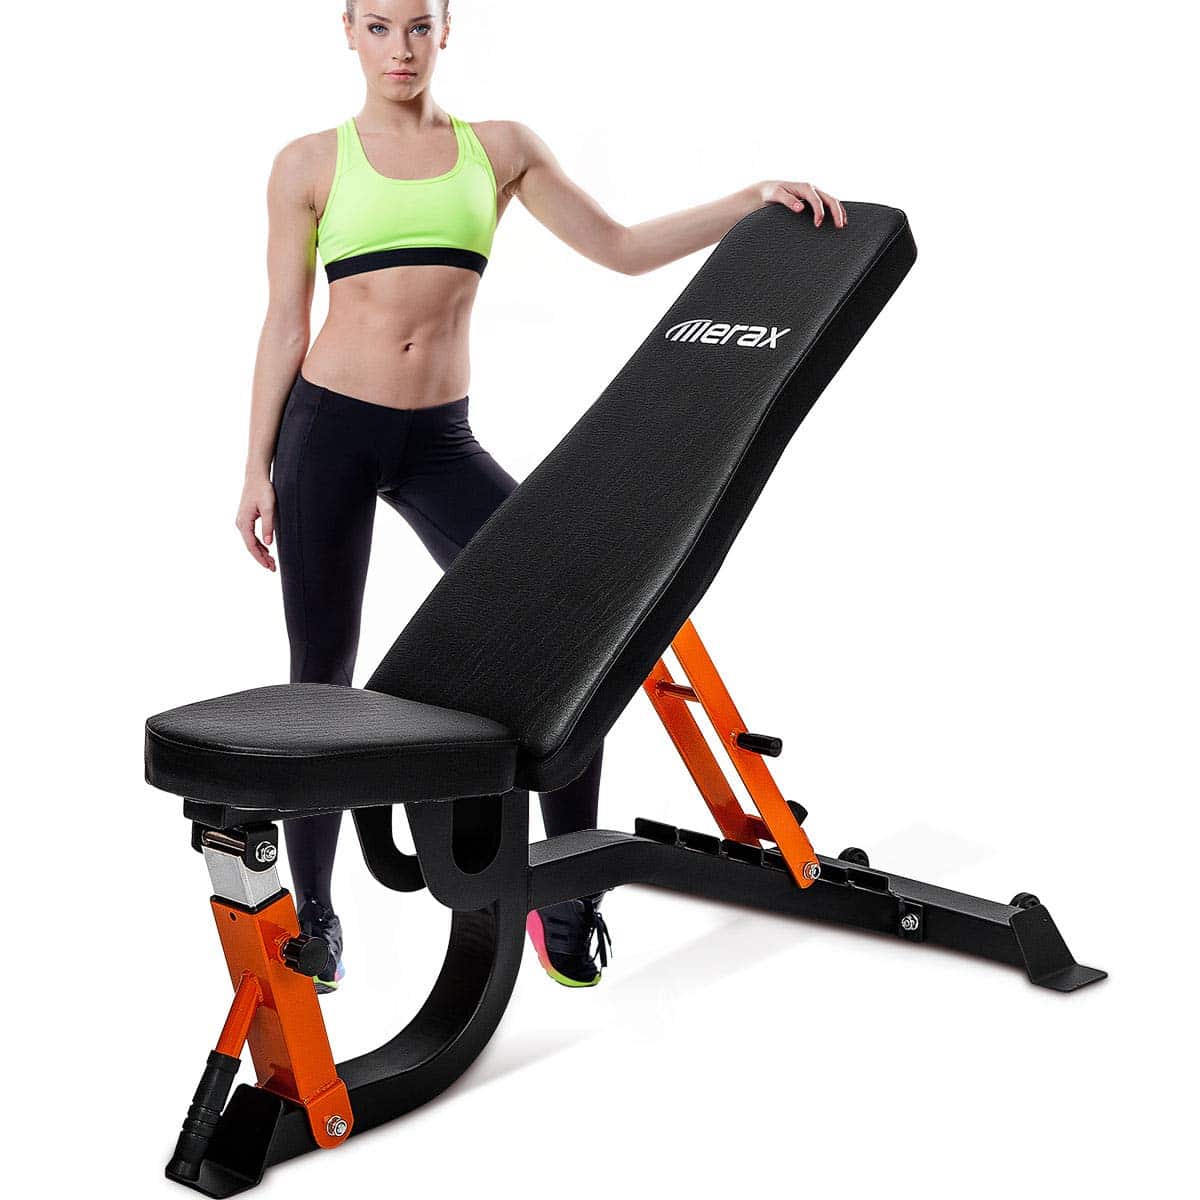 Simple Adjustable Weight Bench Ratings for Weight Loss